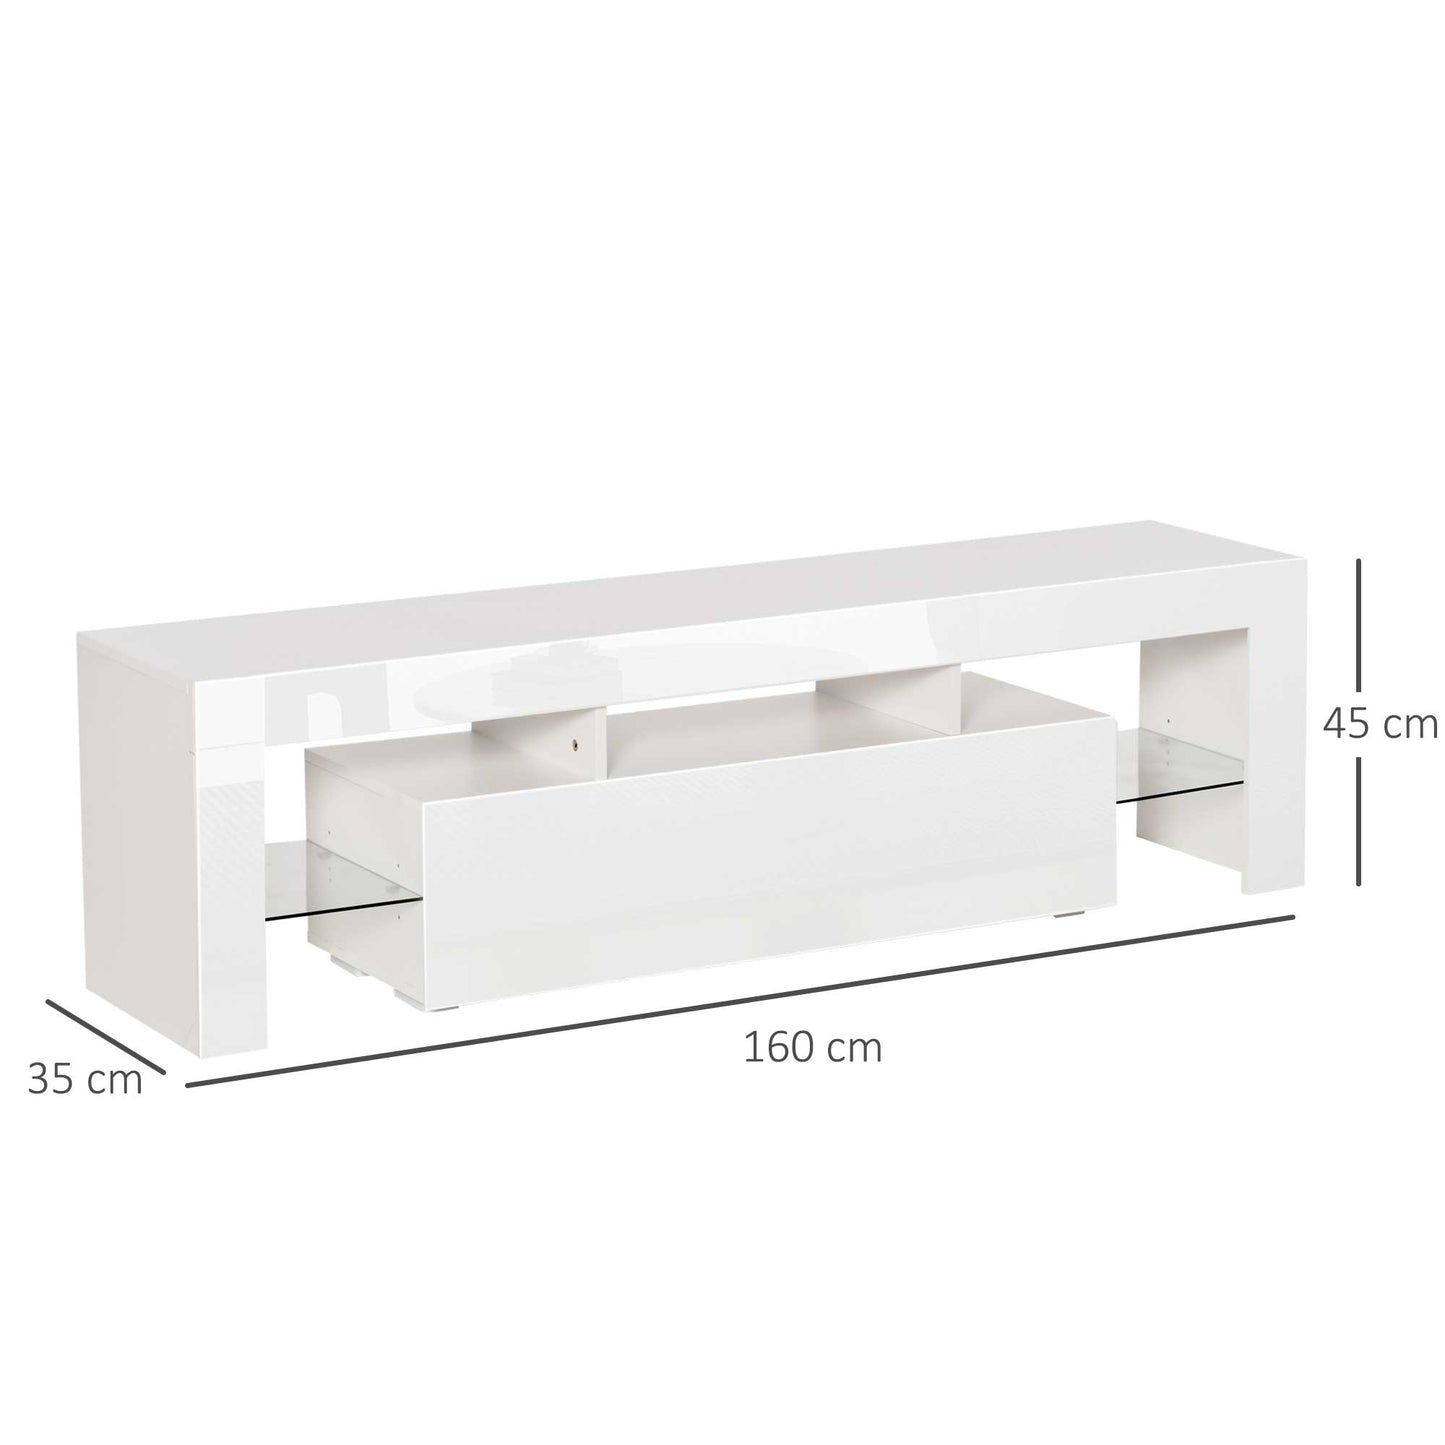 HOMCOM High Gloss TV Stand Cabinet with LED RGB Lights and Remote Control for TVs up to 65", Media TV Console Table with Storage Compartment, White W/ Lights,